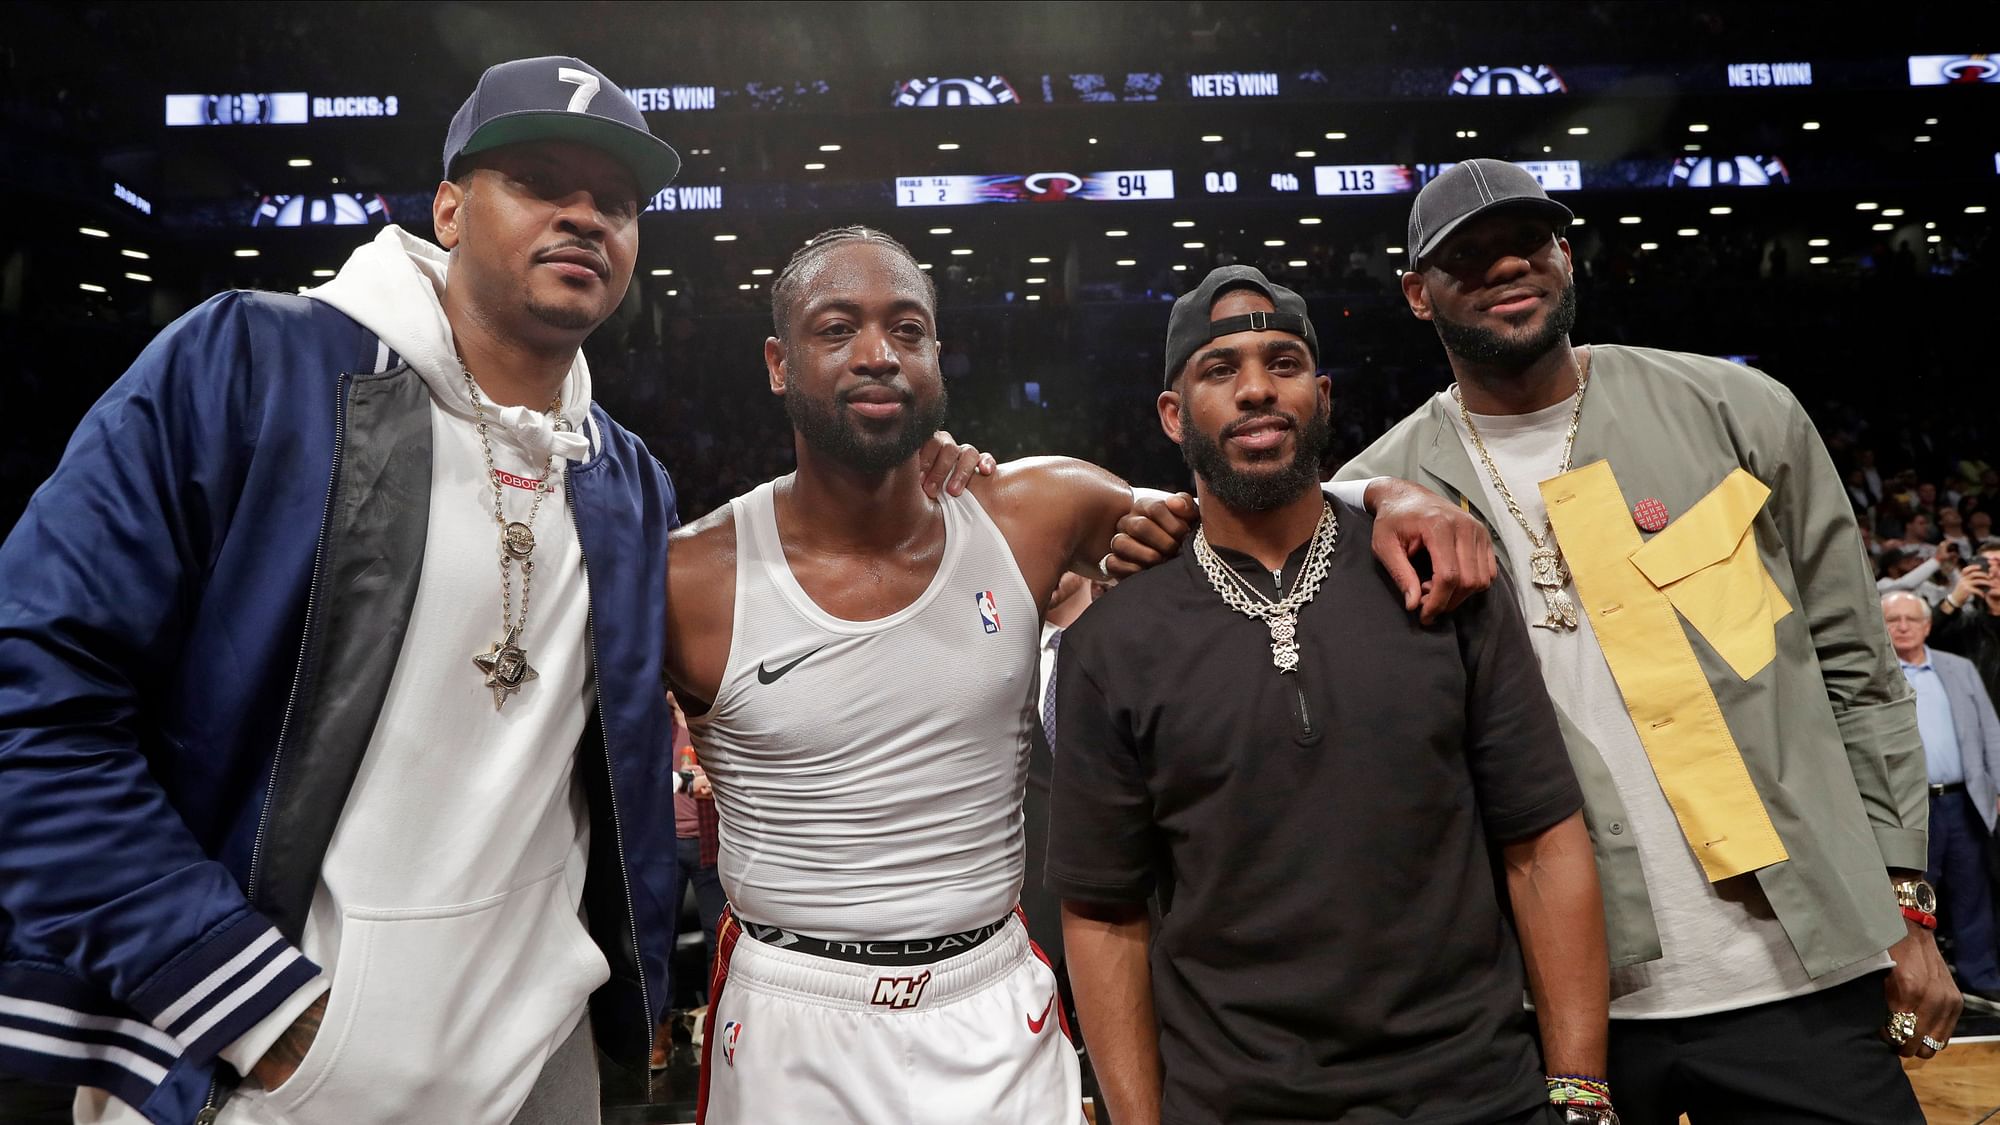 Carmelo Anthony, Miami Heat guard Dwyane Wade, Houston Rockets guard Chris Paul and Los Angeles Lakers forward LeBron James. from left, pose for a photographs on the court after Wade’s final NBA basketball game, against the Brooklyn Nets on Wednesday, April 10, 2019, in New York.